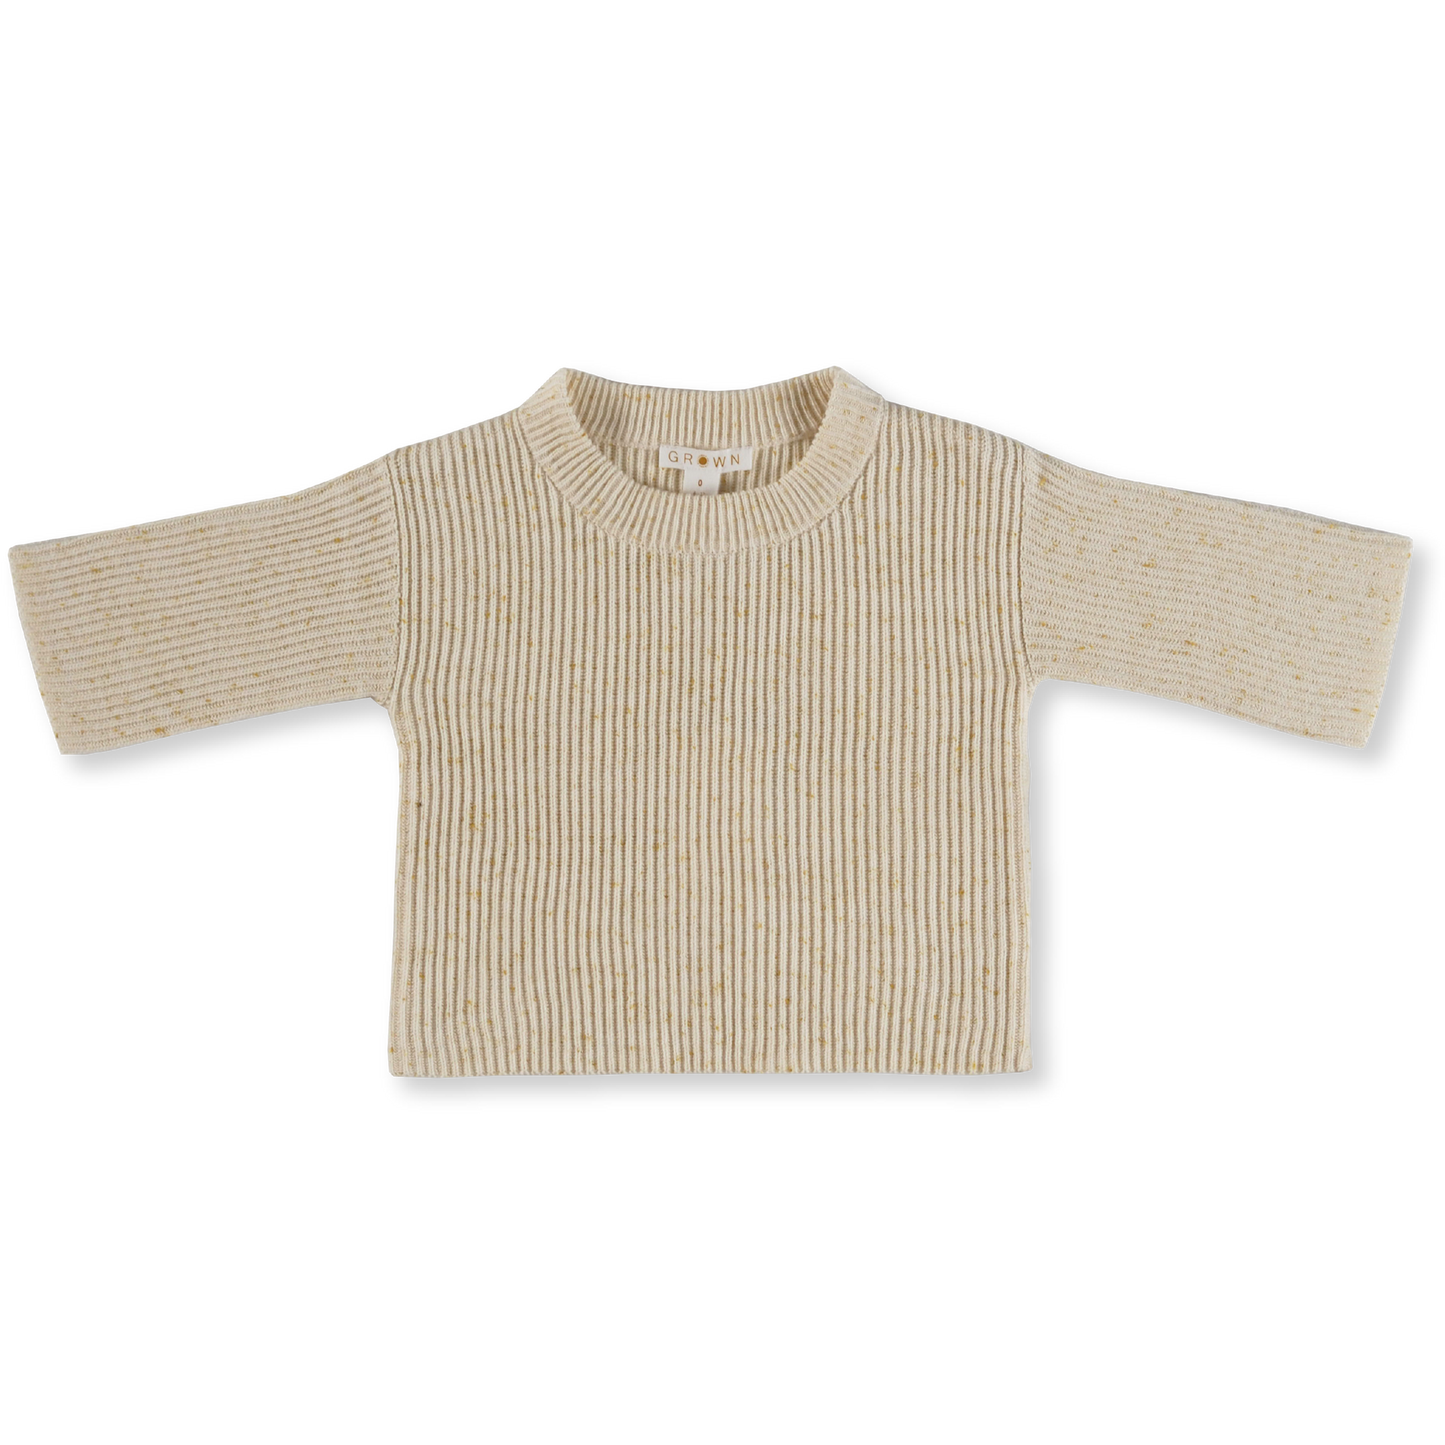 Grown Speckle Rib Pull Over - Golden Speckle